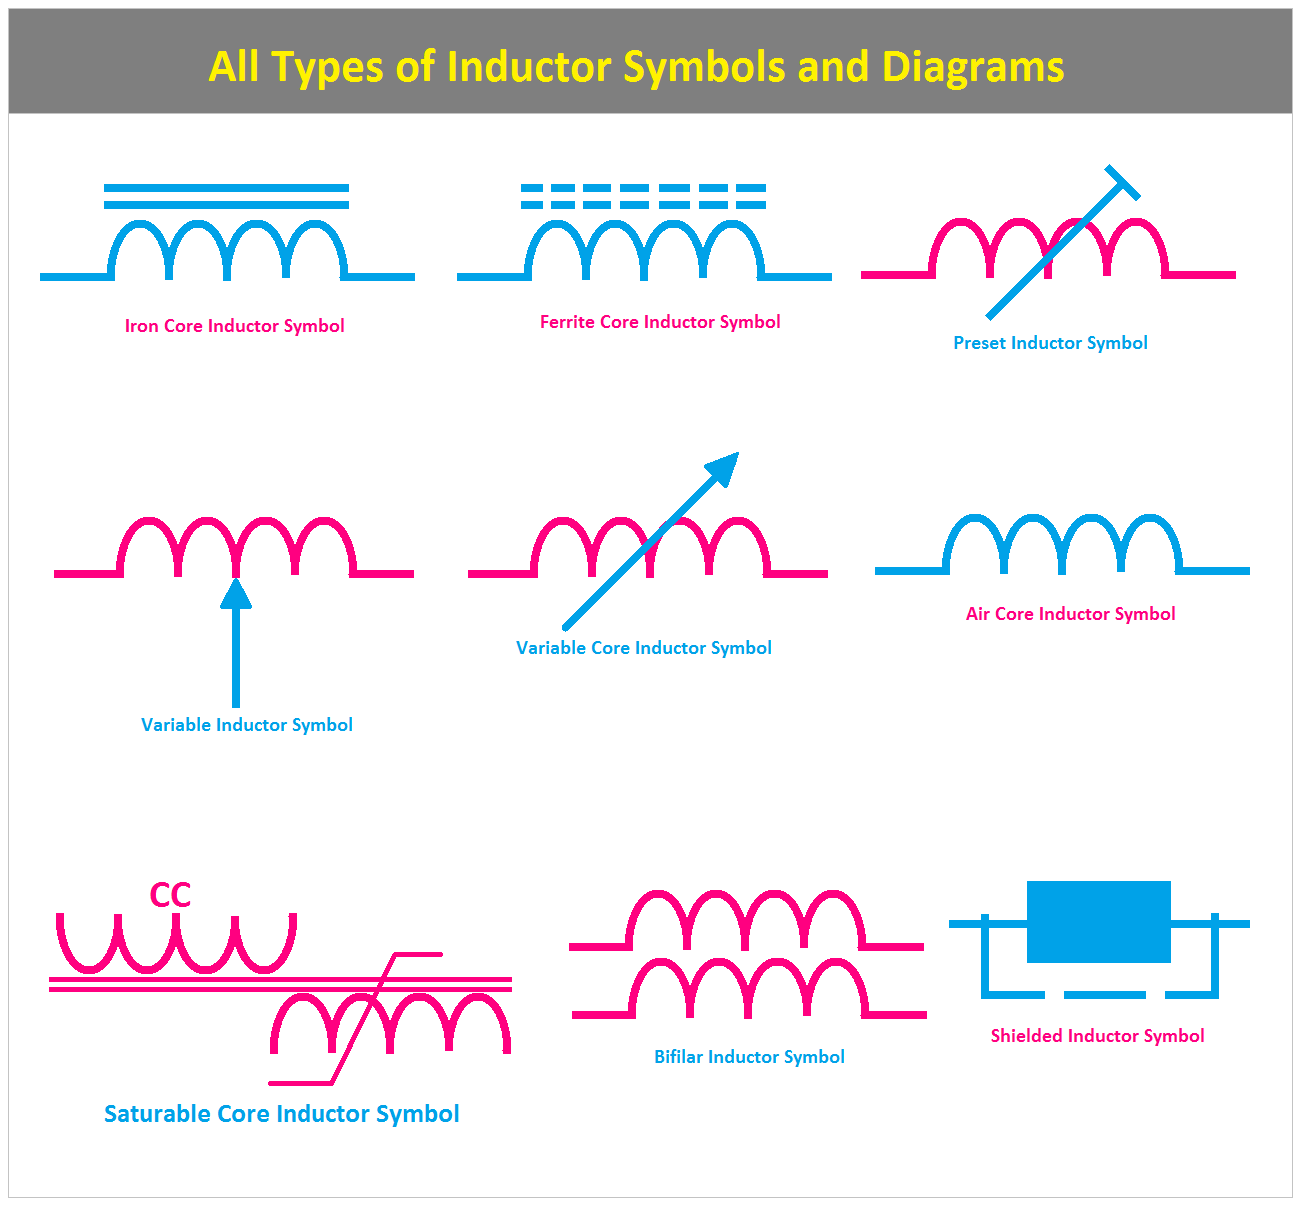 All Types of Inductor Symbols and Diagrams